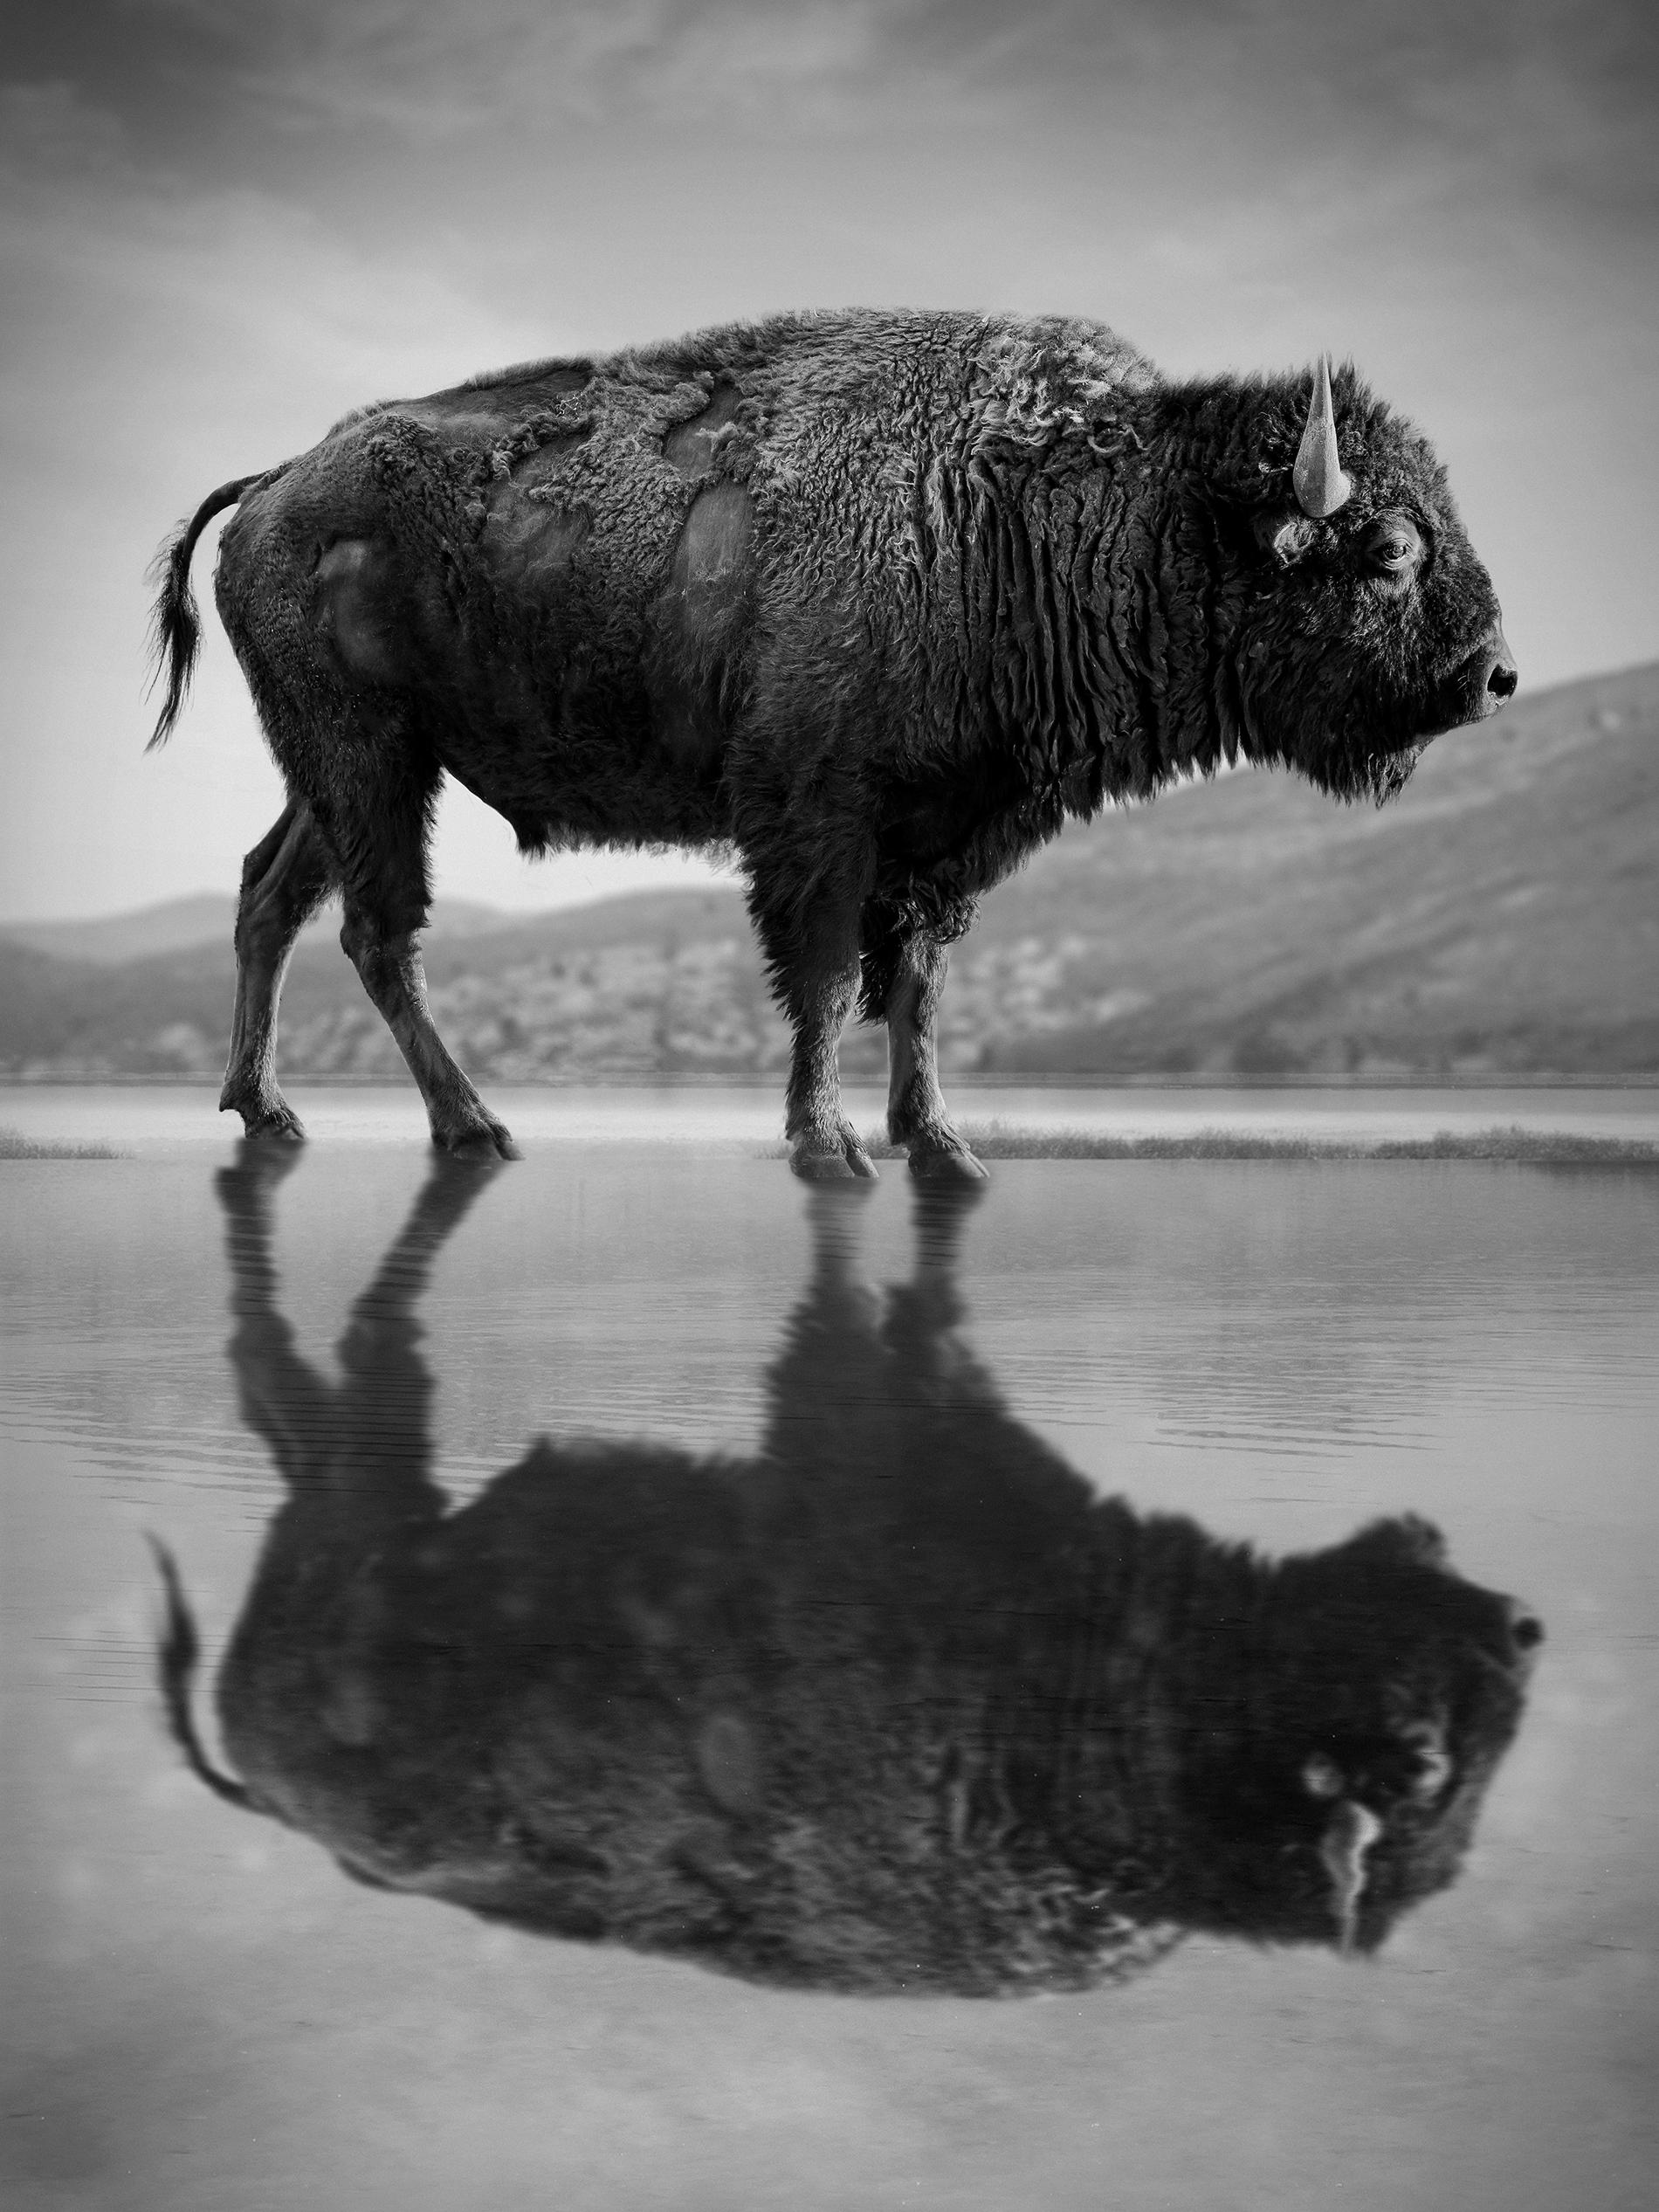 Black and White Photograph Shane Russeck - "Old World" 48x36 Black & White Photography Bison Buffalo Signed AP Photograph